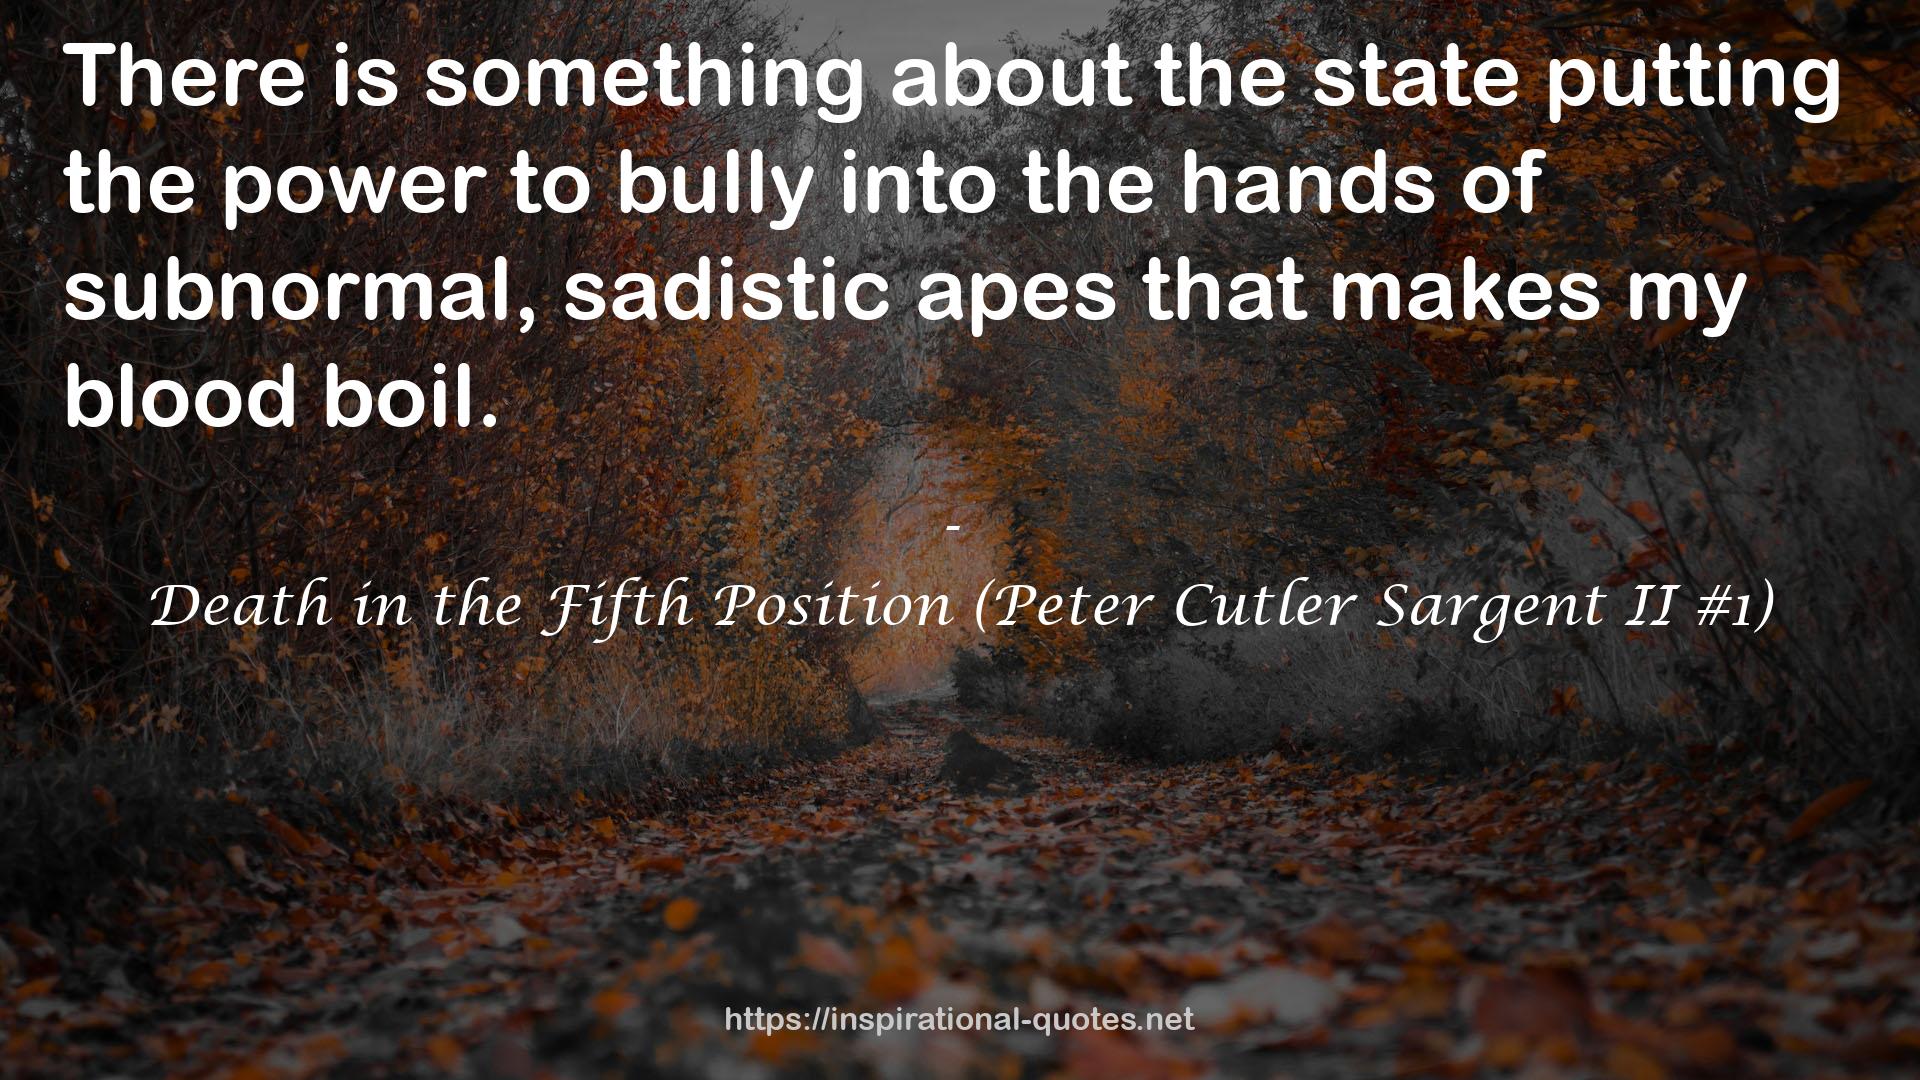 Death in the Fifth Position (Peter Cutler Sargent II #1) QUOTES